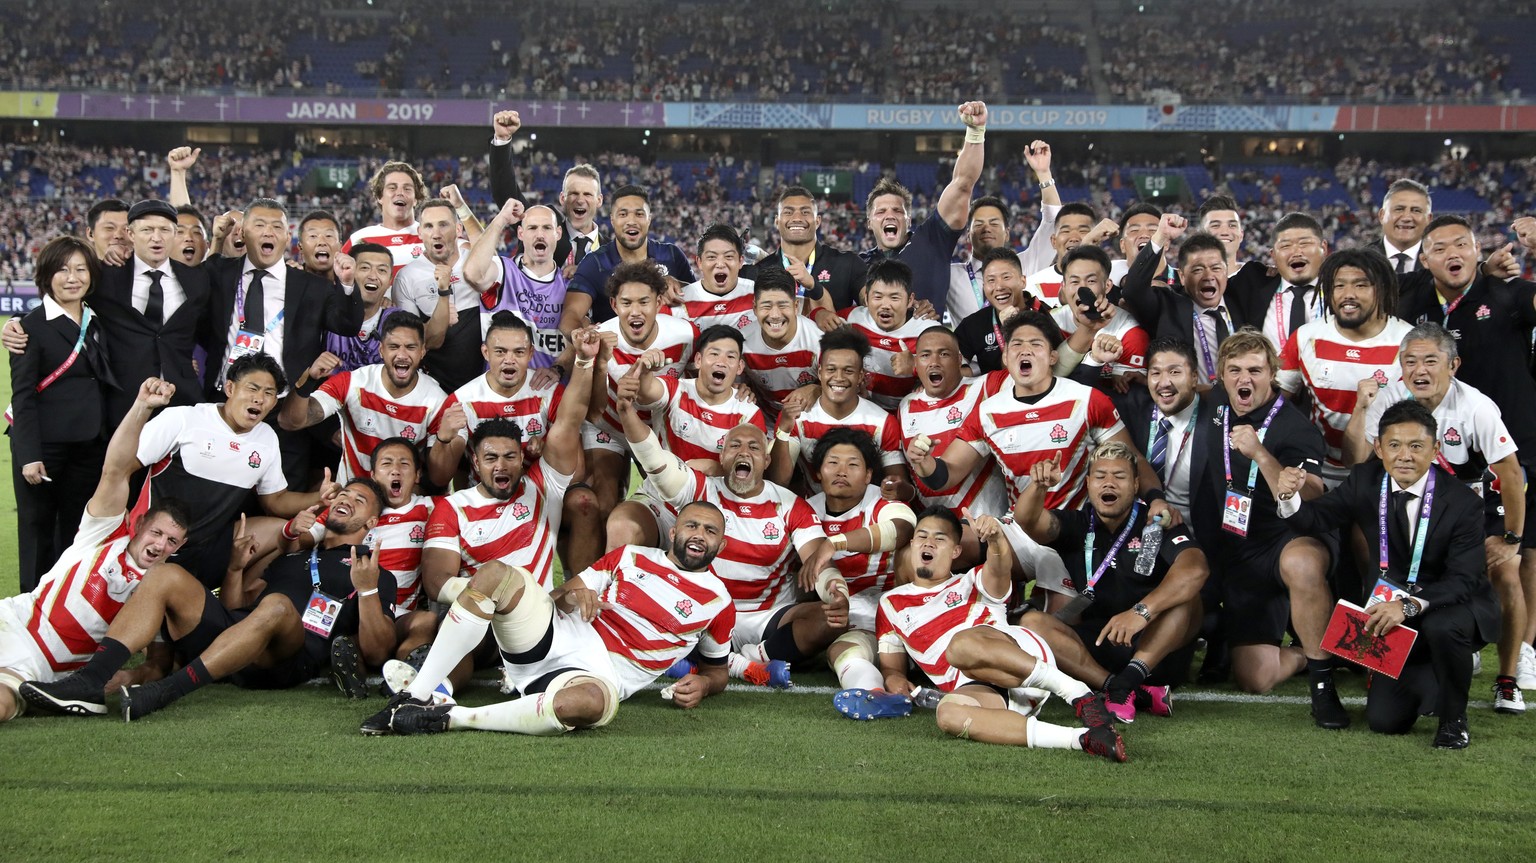 Japan players and management celebrate after defeating Scotland 28-21 in their Rugby World Cup Pool A game at International Stadium in Yokohama, Japan, Sunday, Oct. 13, 2019. (AP Photo/Christophe Ena)